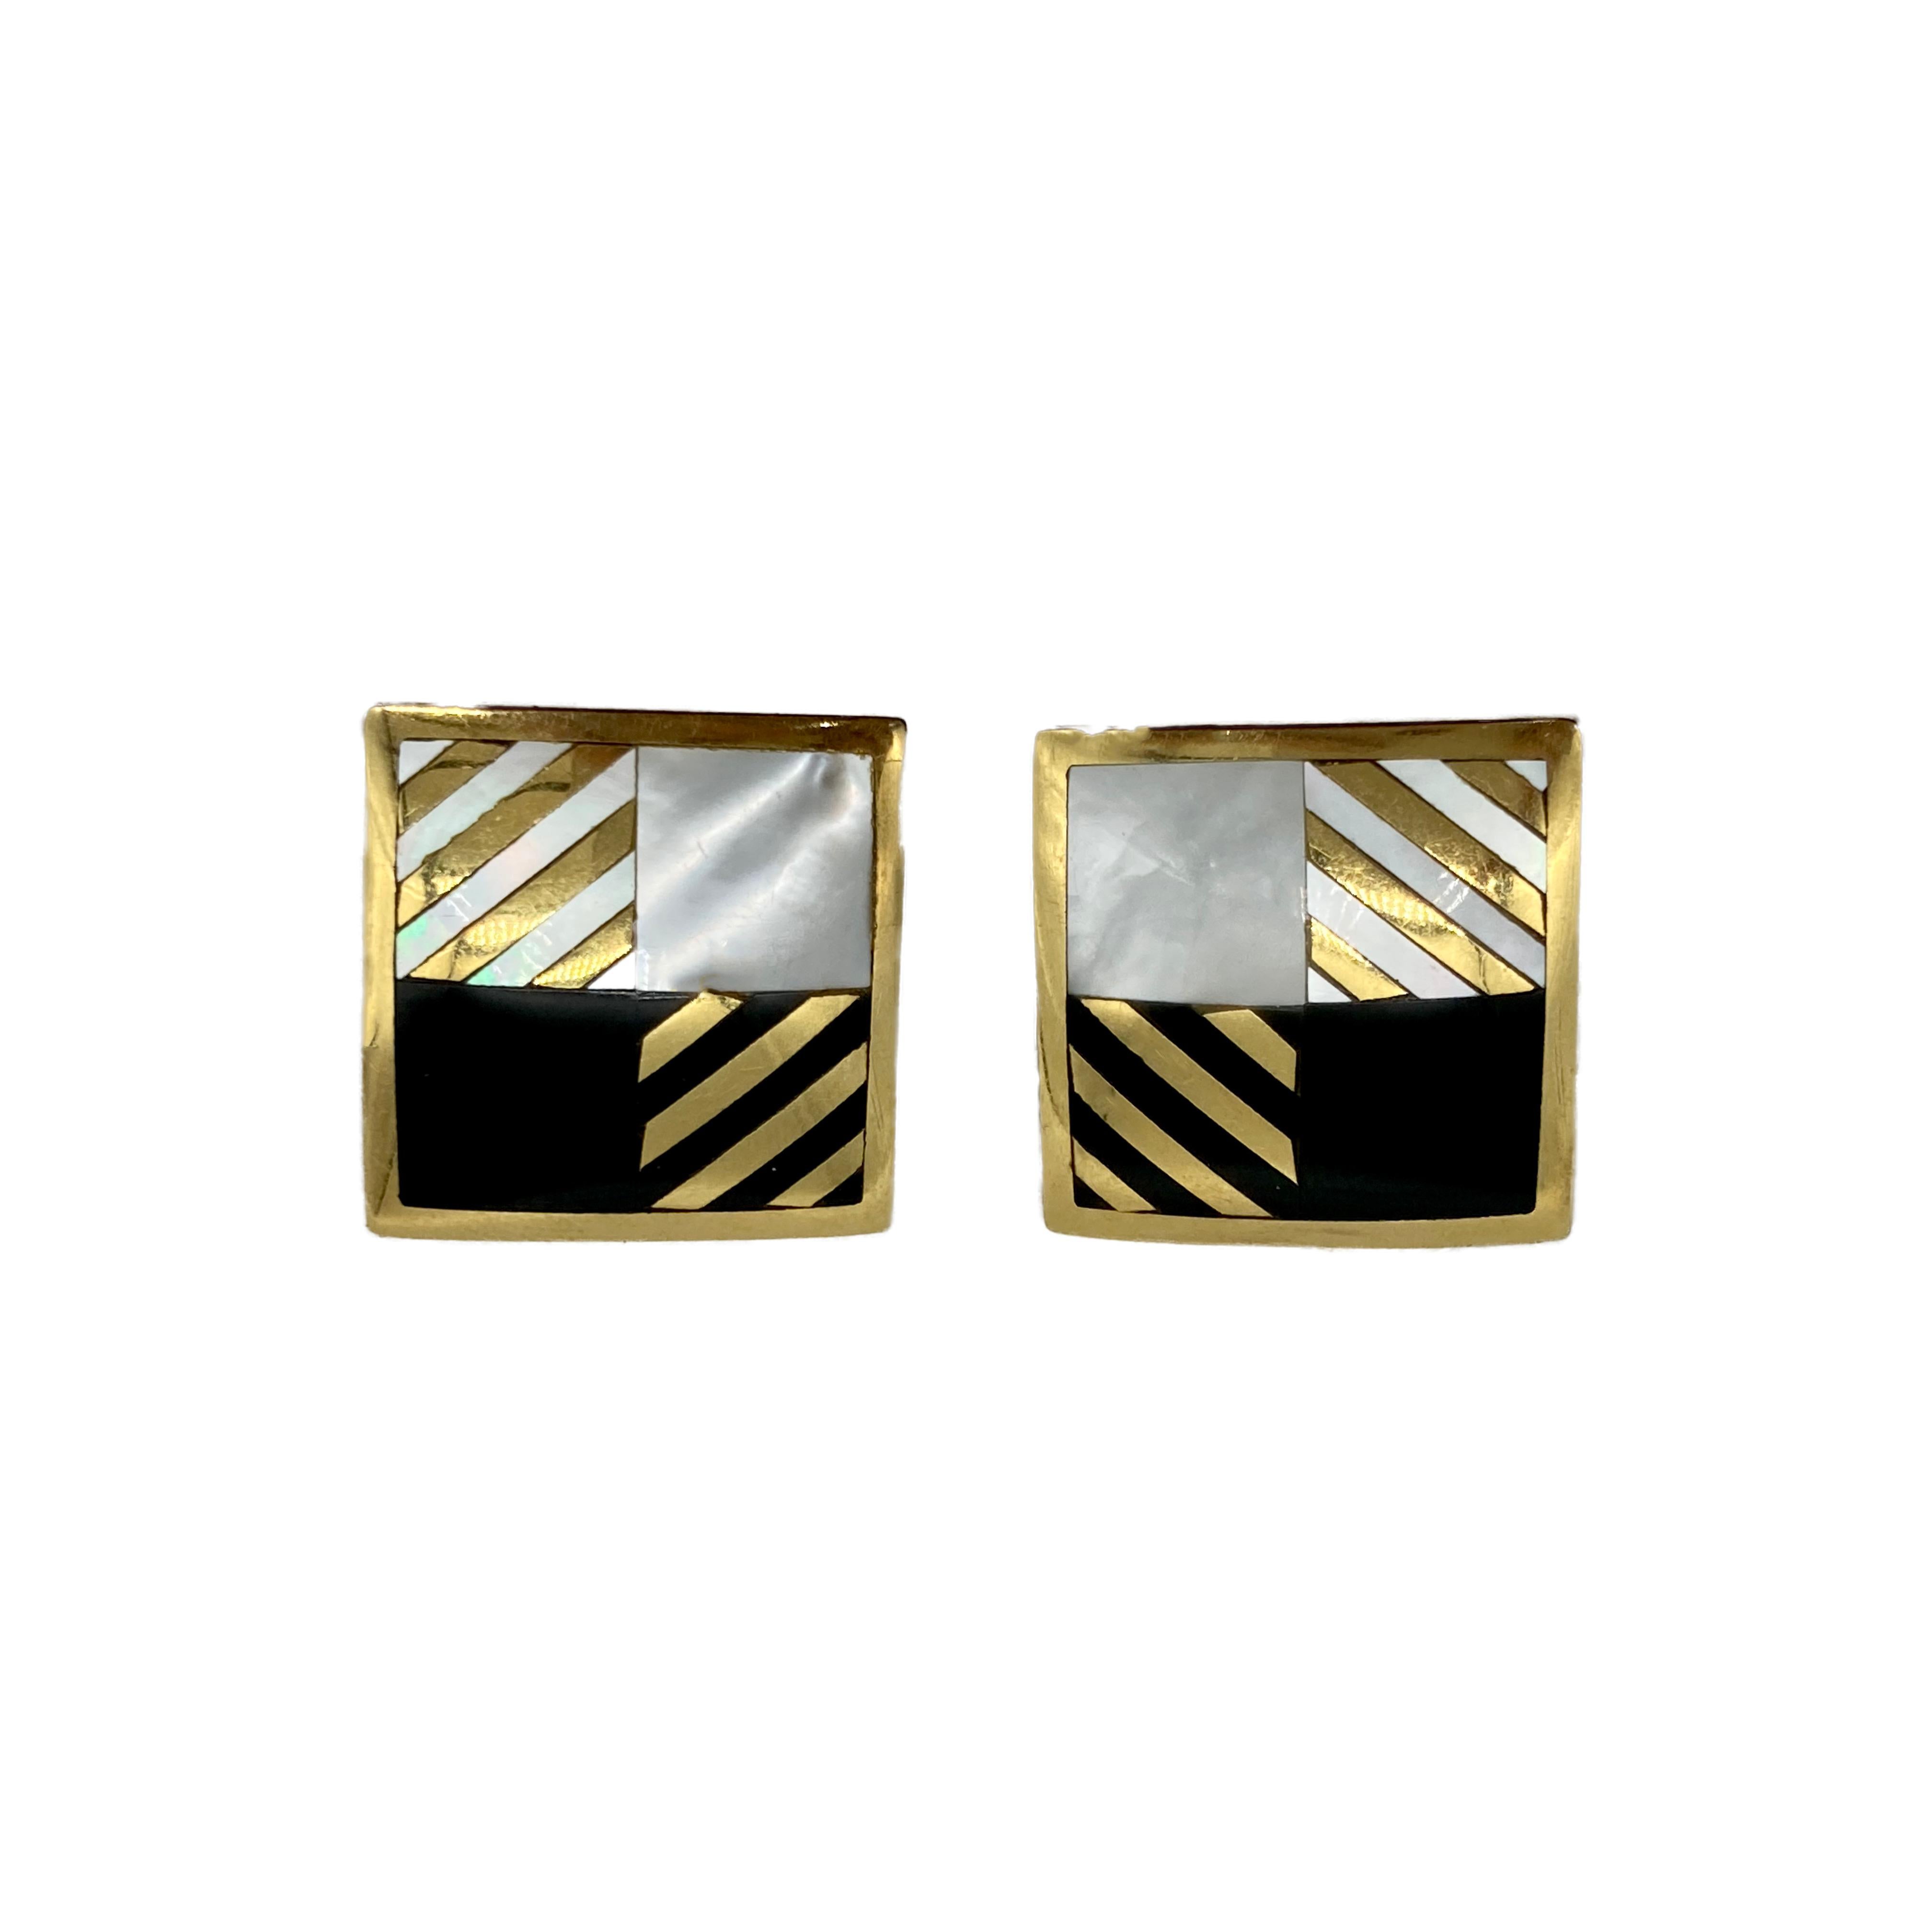 Chic Tiffany & Co. inlaid mother of pearl and 18 karat gold earclips circa 1970s.